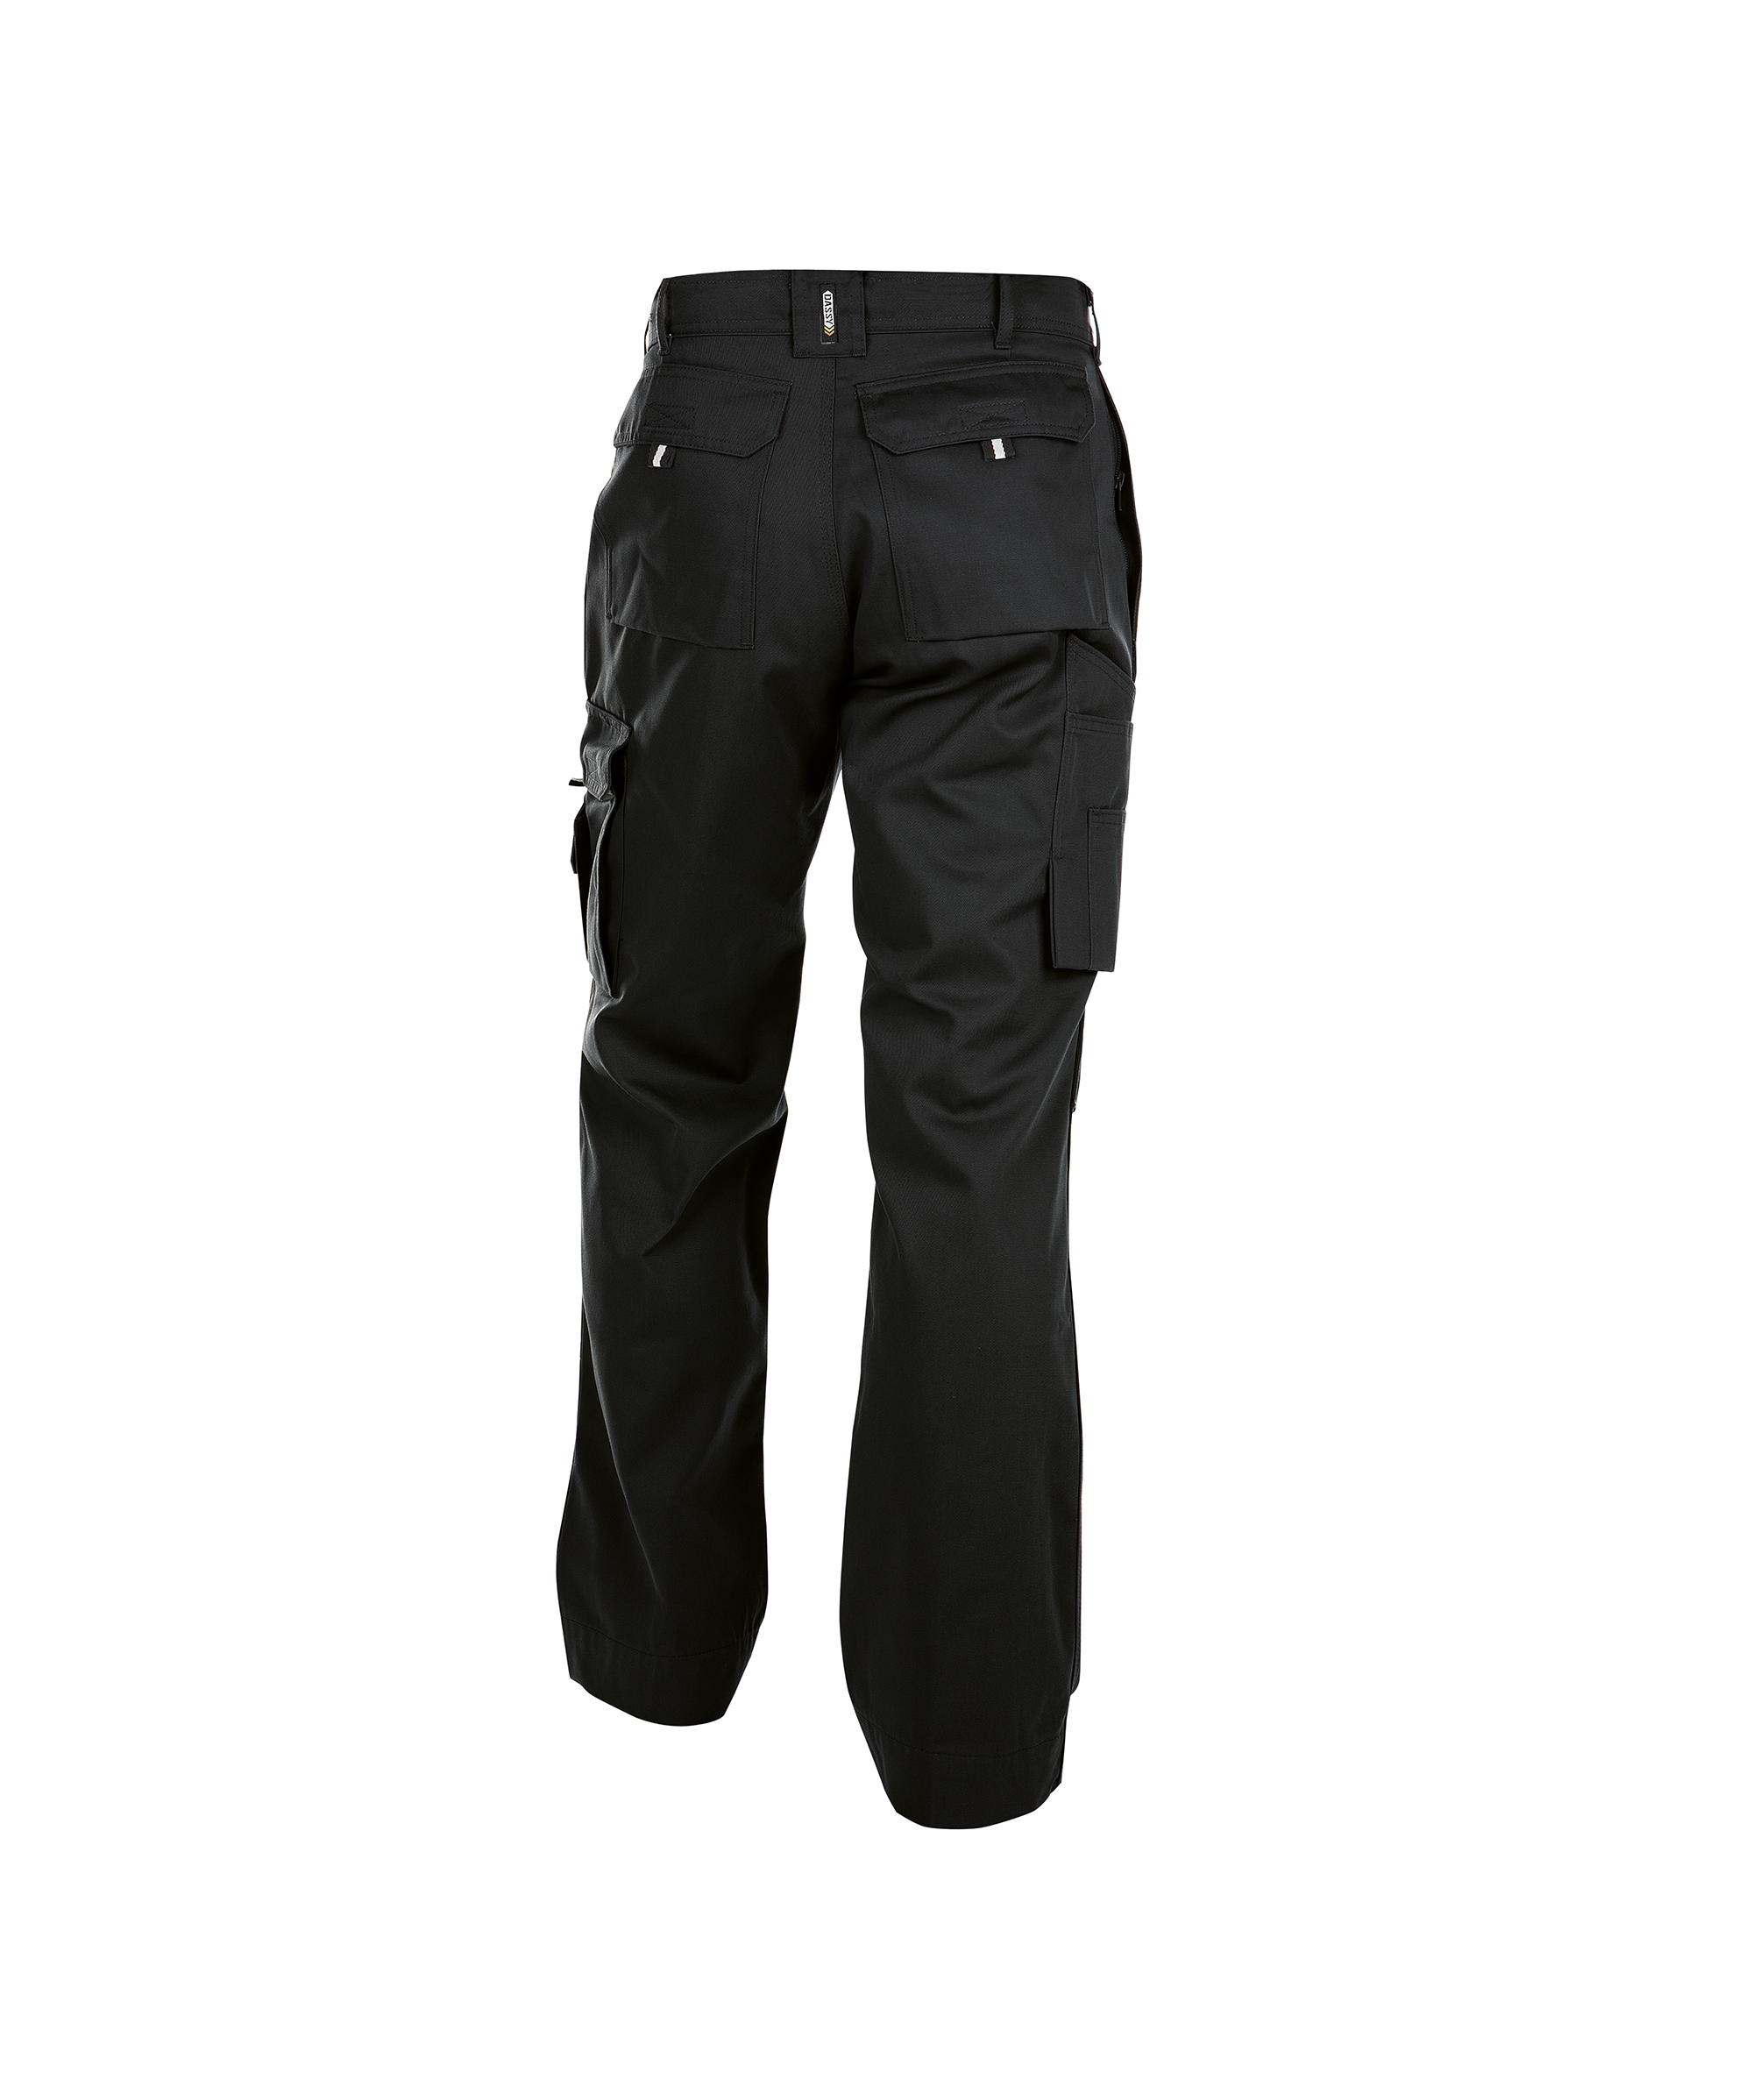 miami_work-trousers-with-knee-pockets_black_back.jpg